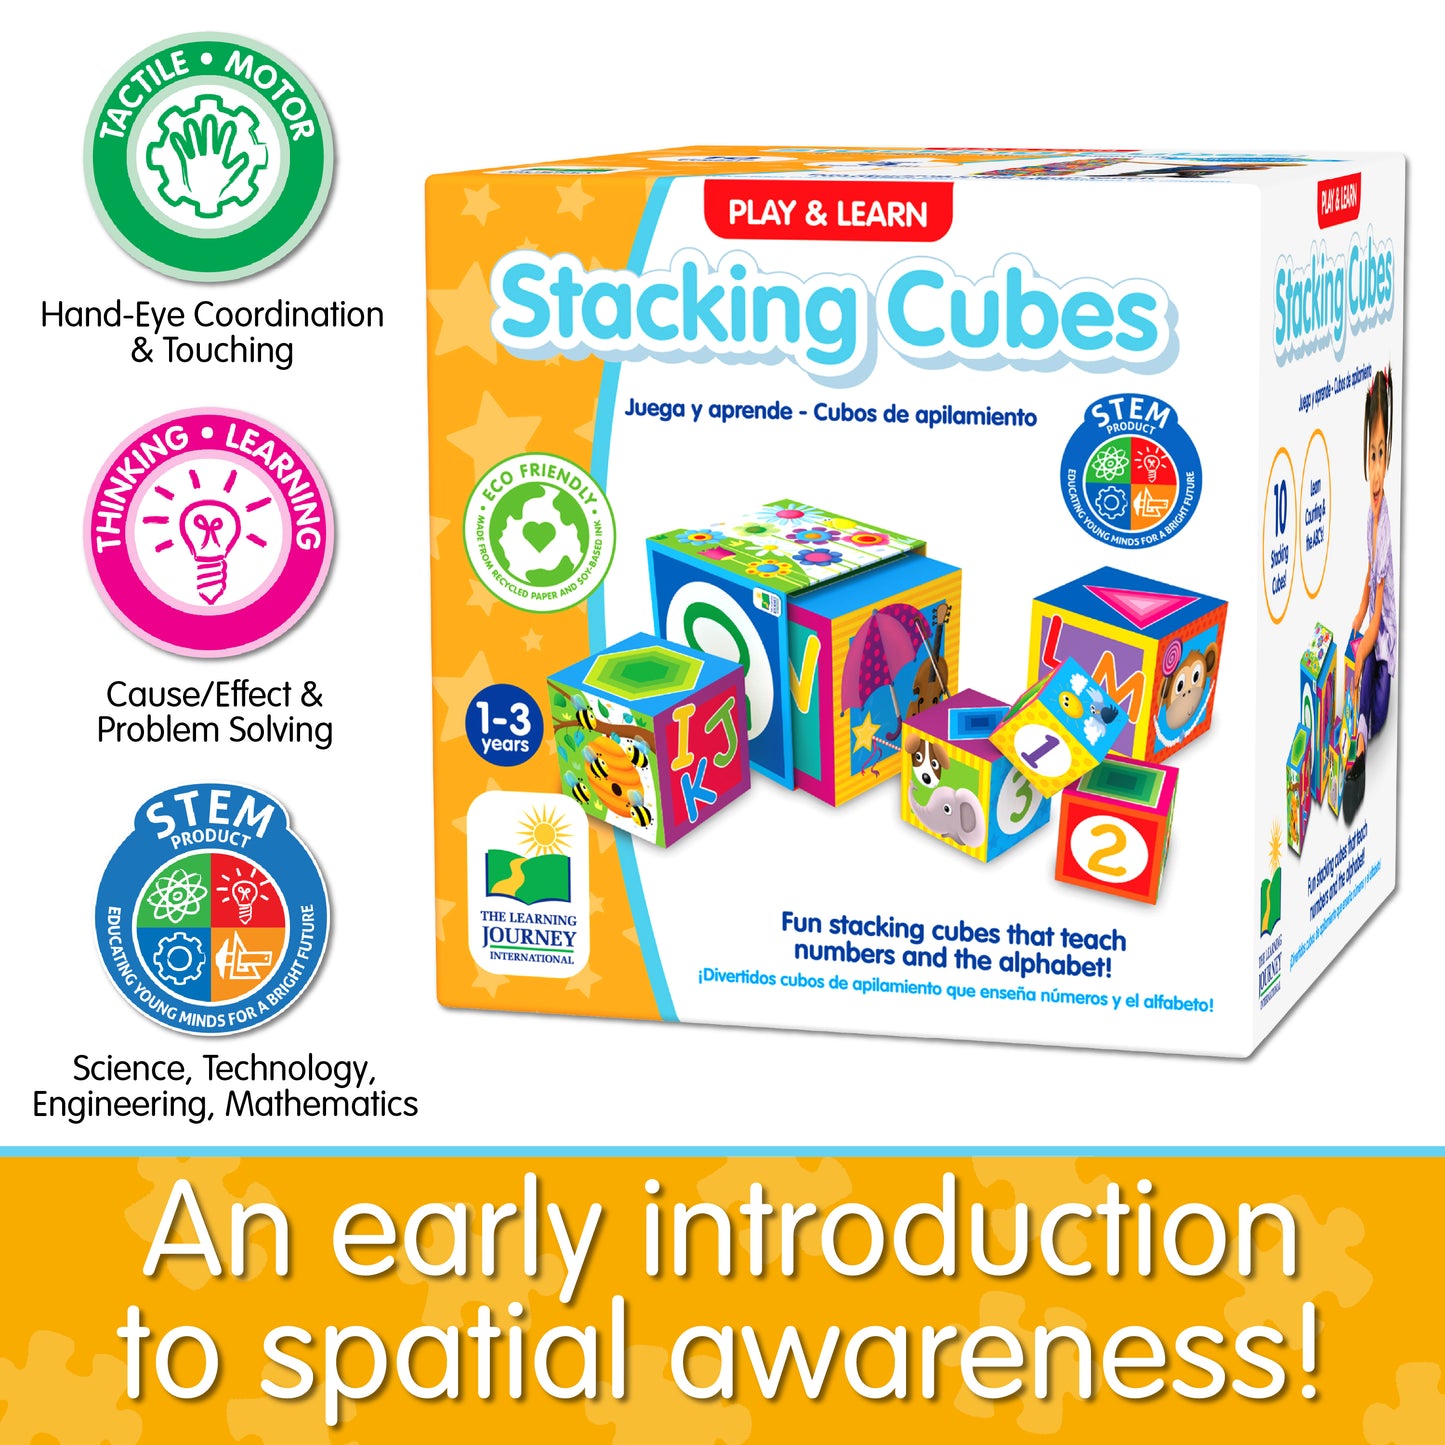 Infographic about Stacking Cubes' educational benefits that says, "An early introduction to spatial awareness!"